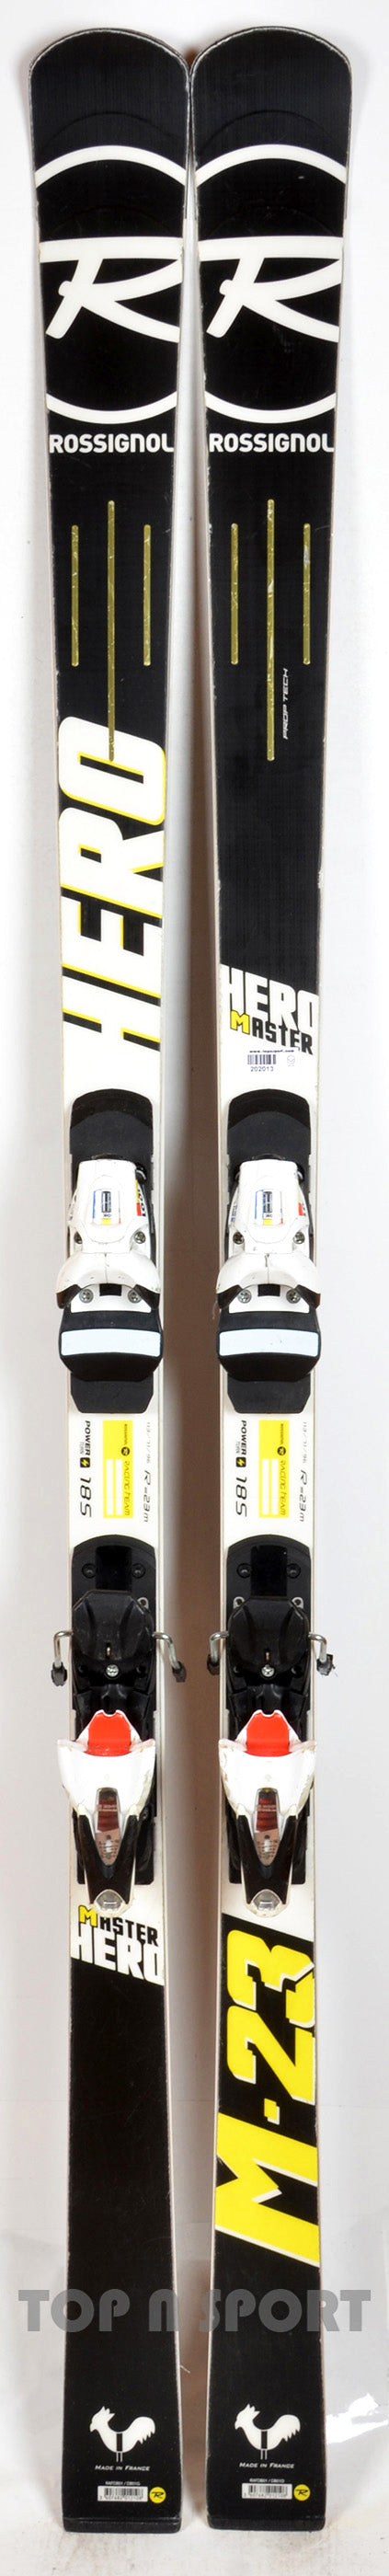 Rossignol HERO MASTER (R21 WC) - skis d'occasion